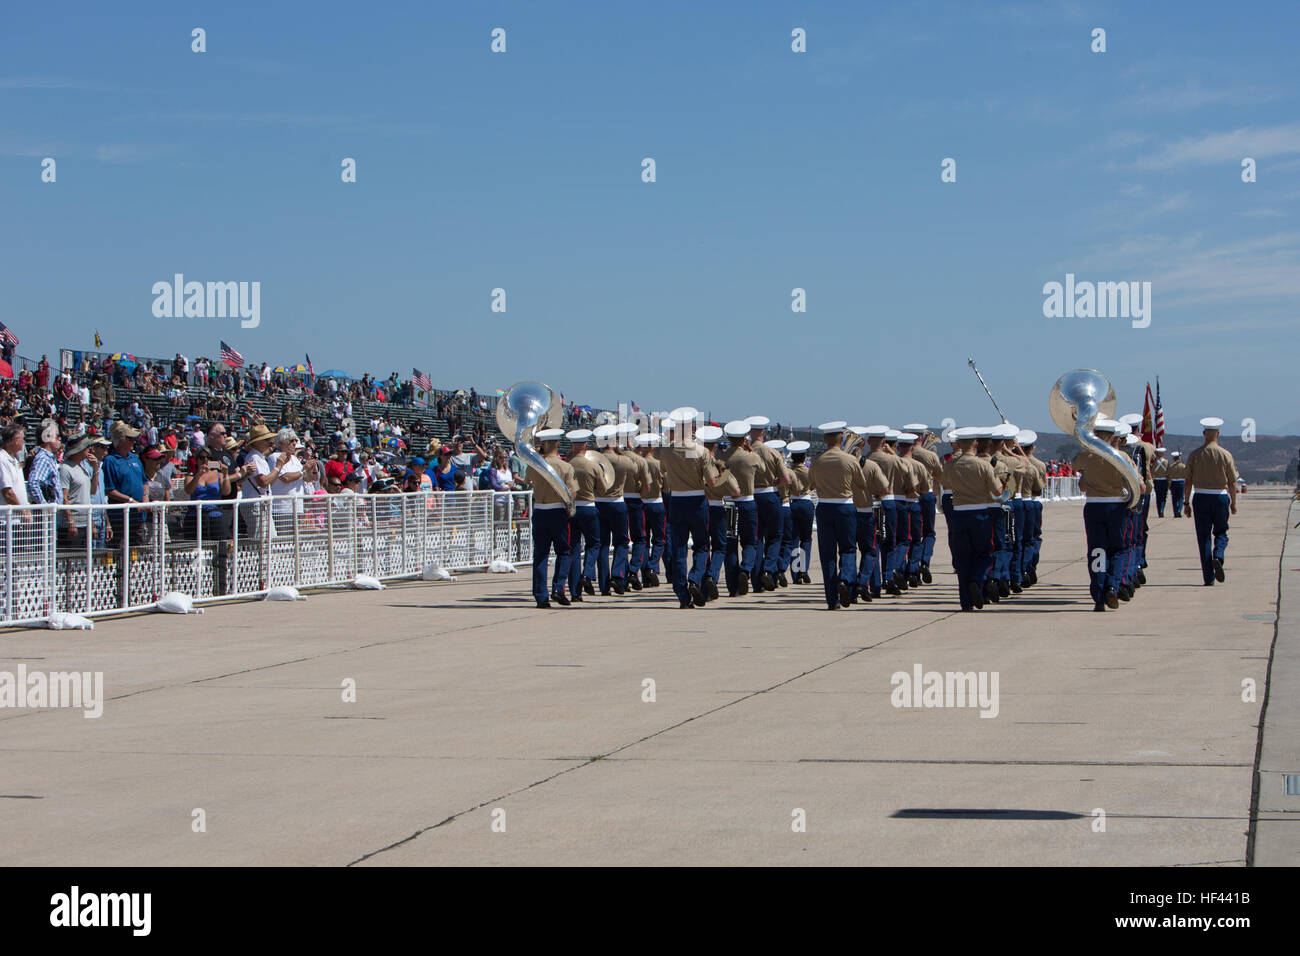 The 3d Marine Aircraft Wing Band performs a musical rendition while marching at the 2016 Marine Corps Air Station (MCAS) Miramar Air Show at MCAS Miramar, Calif., Sept. 23, 2016. The MCAS Miramar Air Show honors 100 years of the Marine Corps Reserves by showcasing aerial prowess of the Armed Forces and their appreciation of the civilian community’s support to the troops. (U.S. Marine Corps photo By Corporal Jessica Y. Lucio/Released) MCAS Miramar Air Show 160923-M-UX416-024 Stock Photo